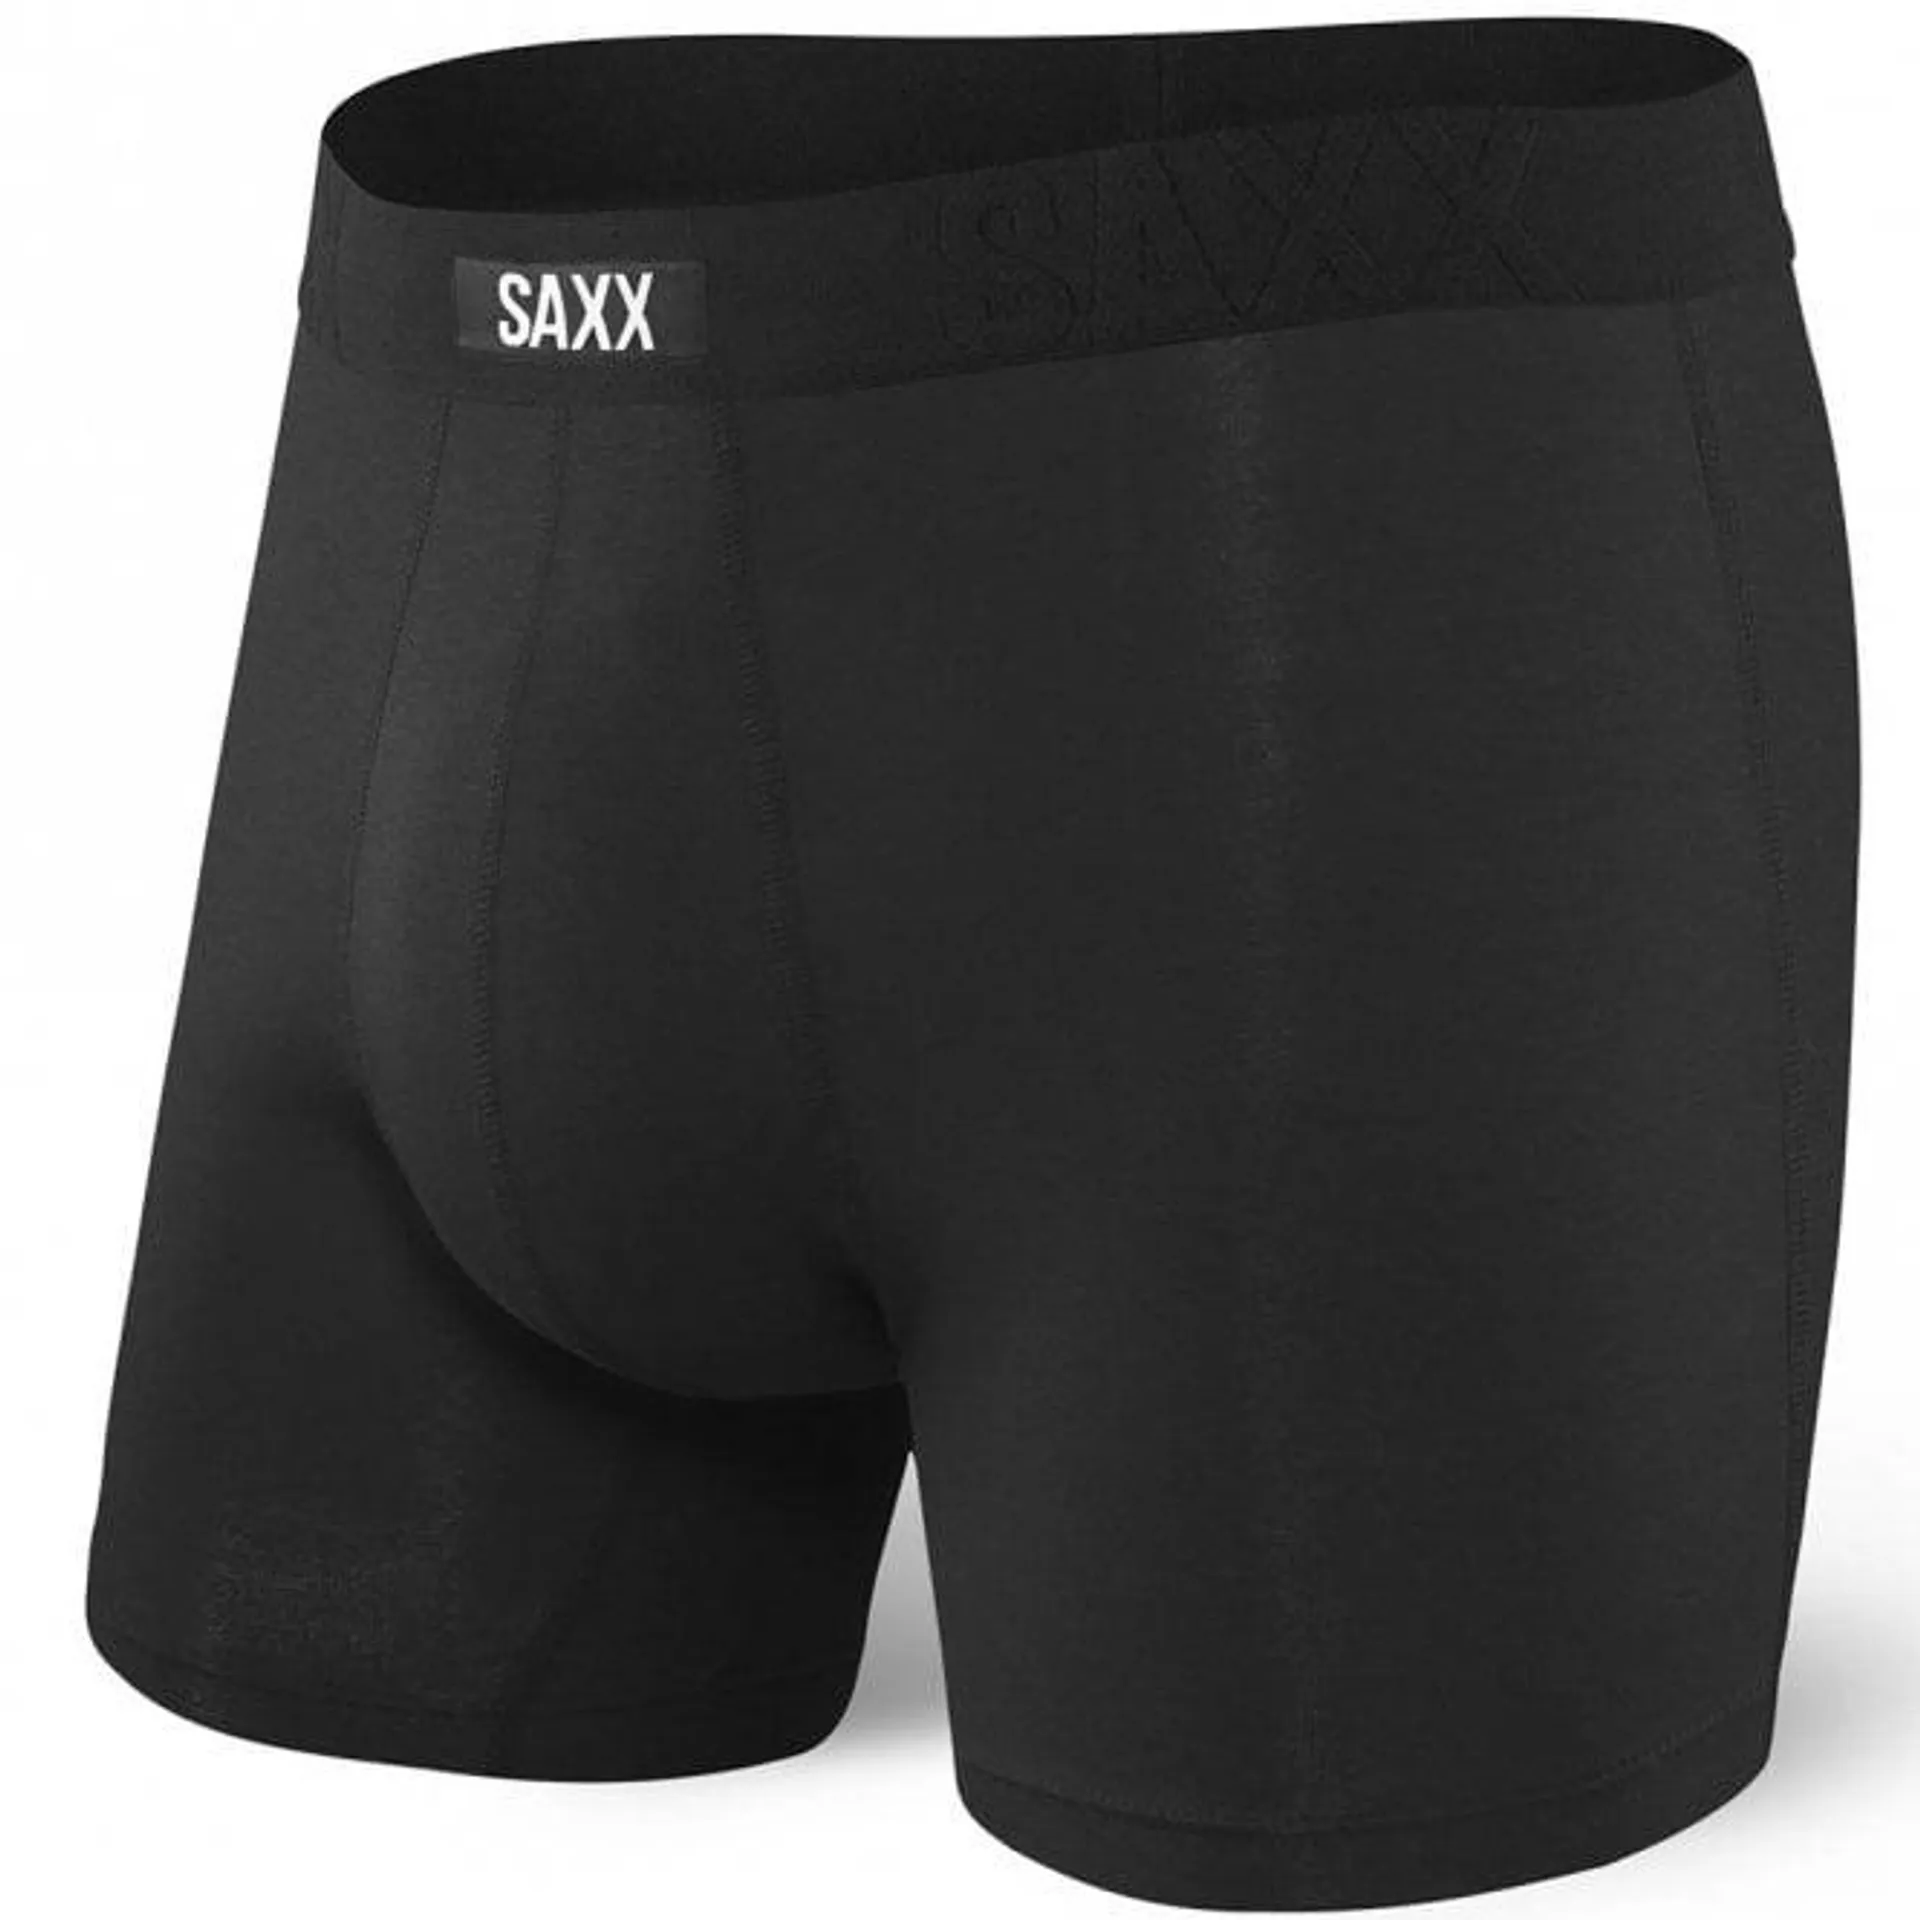 Undercover Boxer Brief with Fly Opening, Solid Black